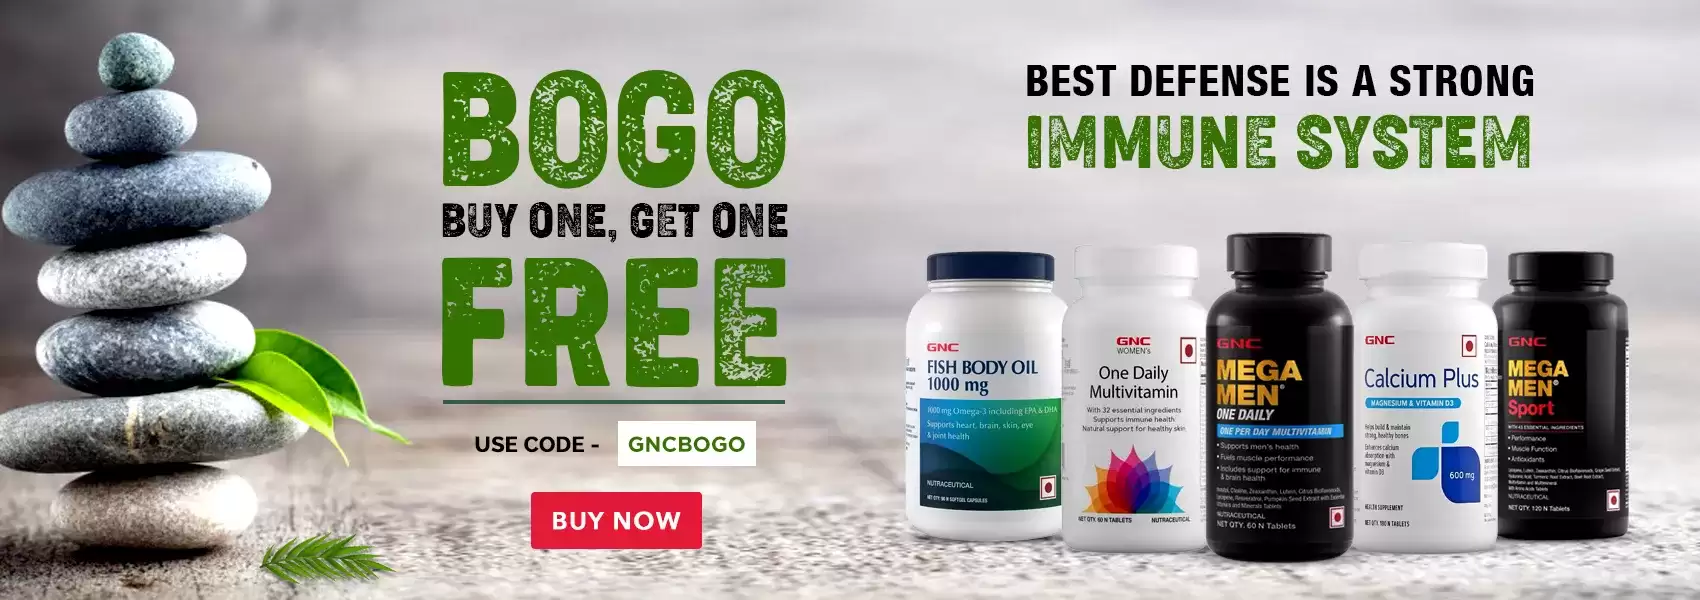 Enjoy Buy 1 Get 1 Offer With This Discount Coupon At Guardian Gnc India